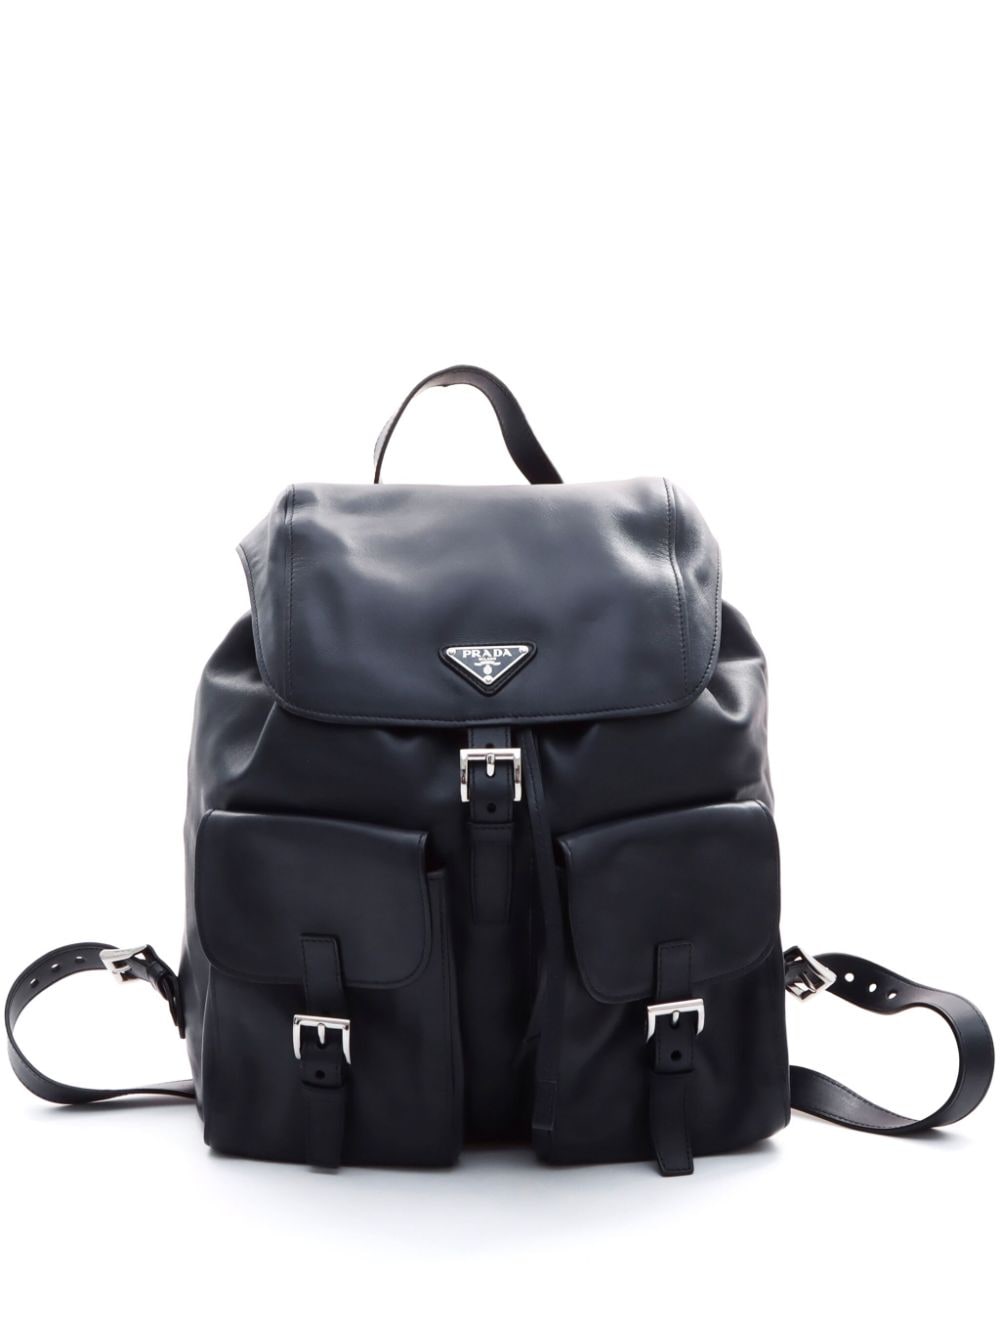 triangle logo leather backpack